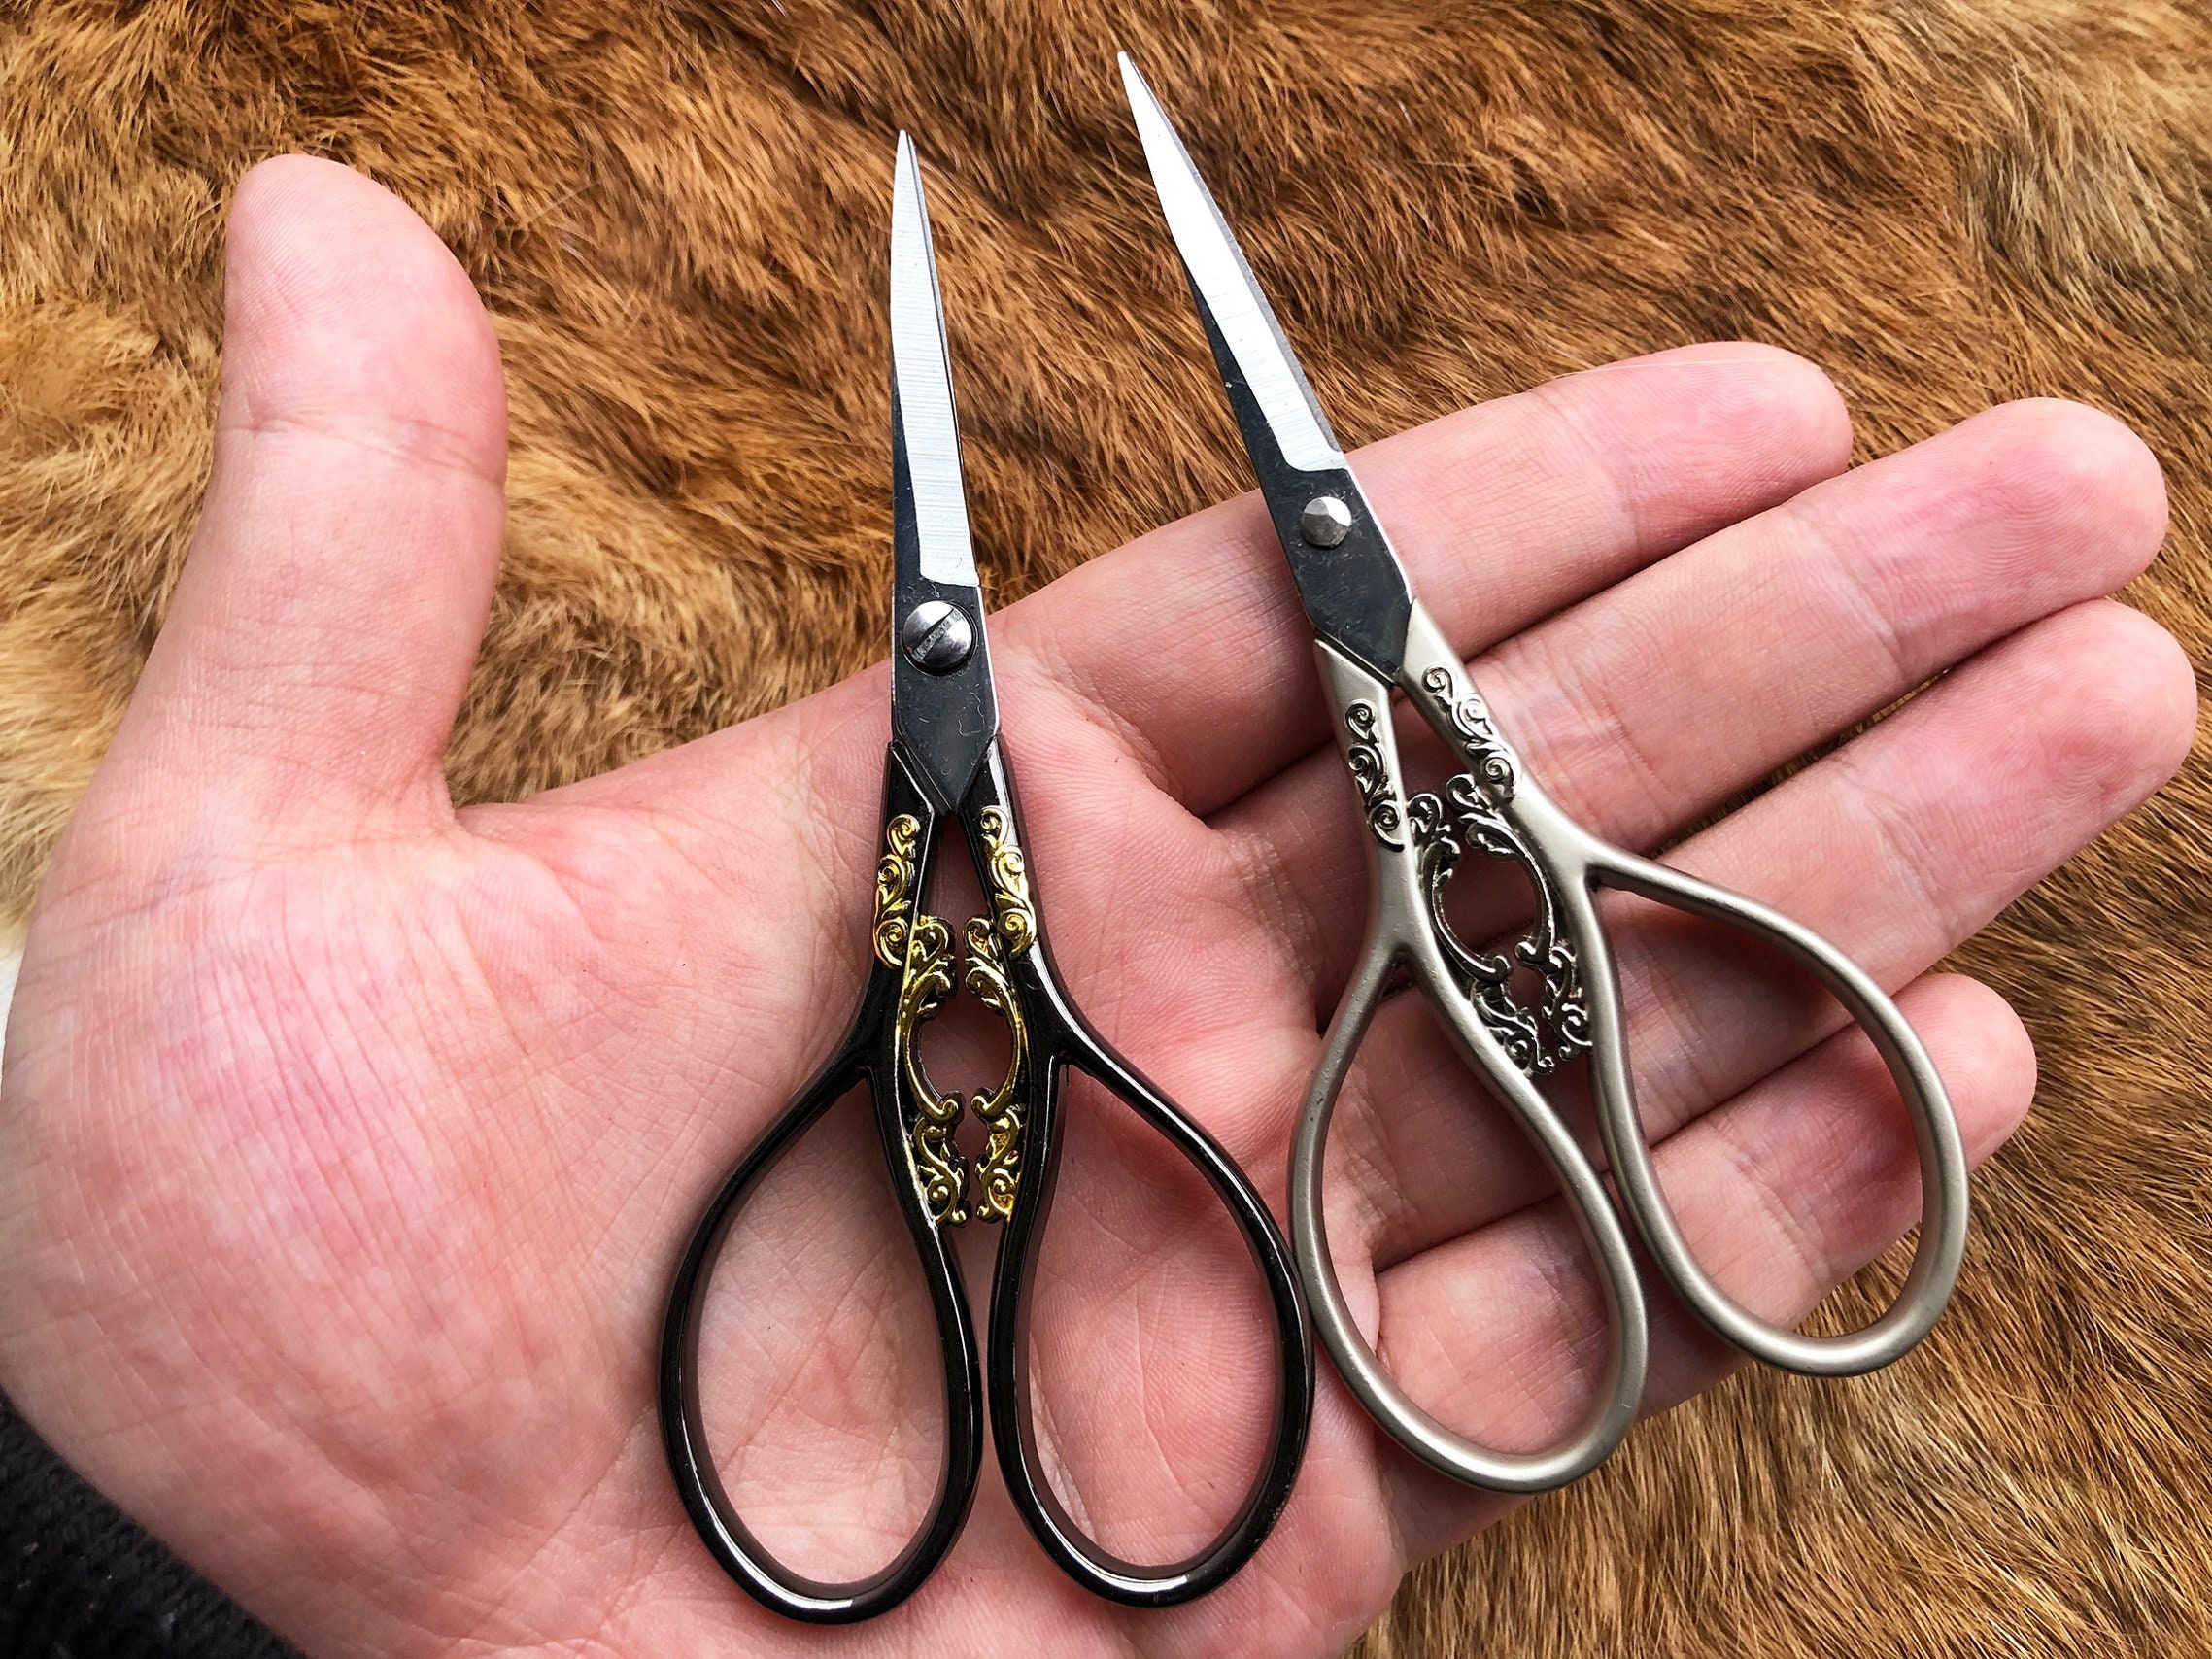 4Pcs Small Scissors with Cover - Thread Snips Scissors for Sewing Portable  Scissors for Fabric Strong Scissors Heavy Duty Embroidery Bonsai Scissors 